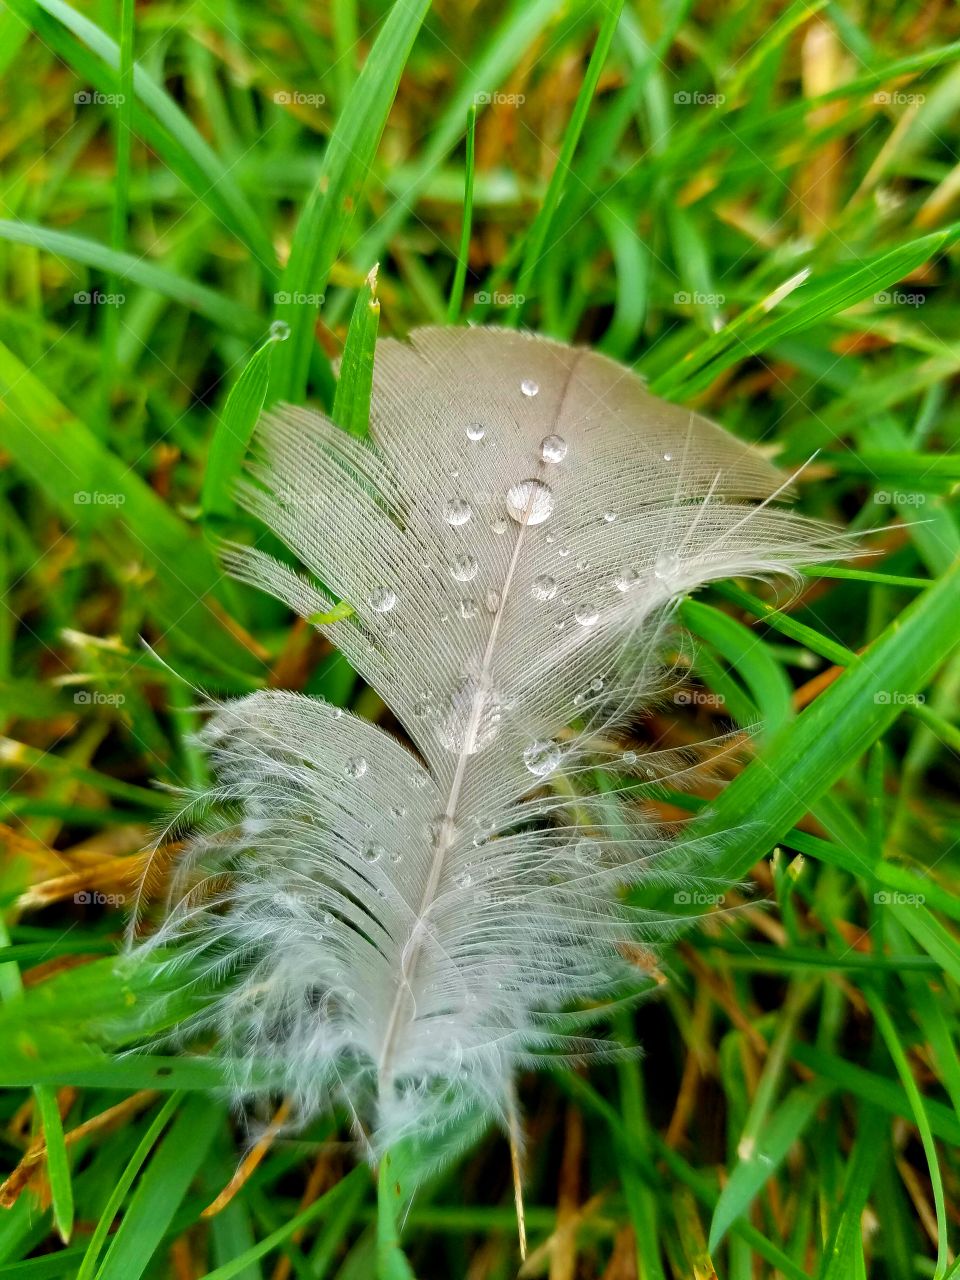 water droplets on a feather